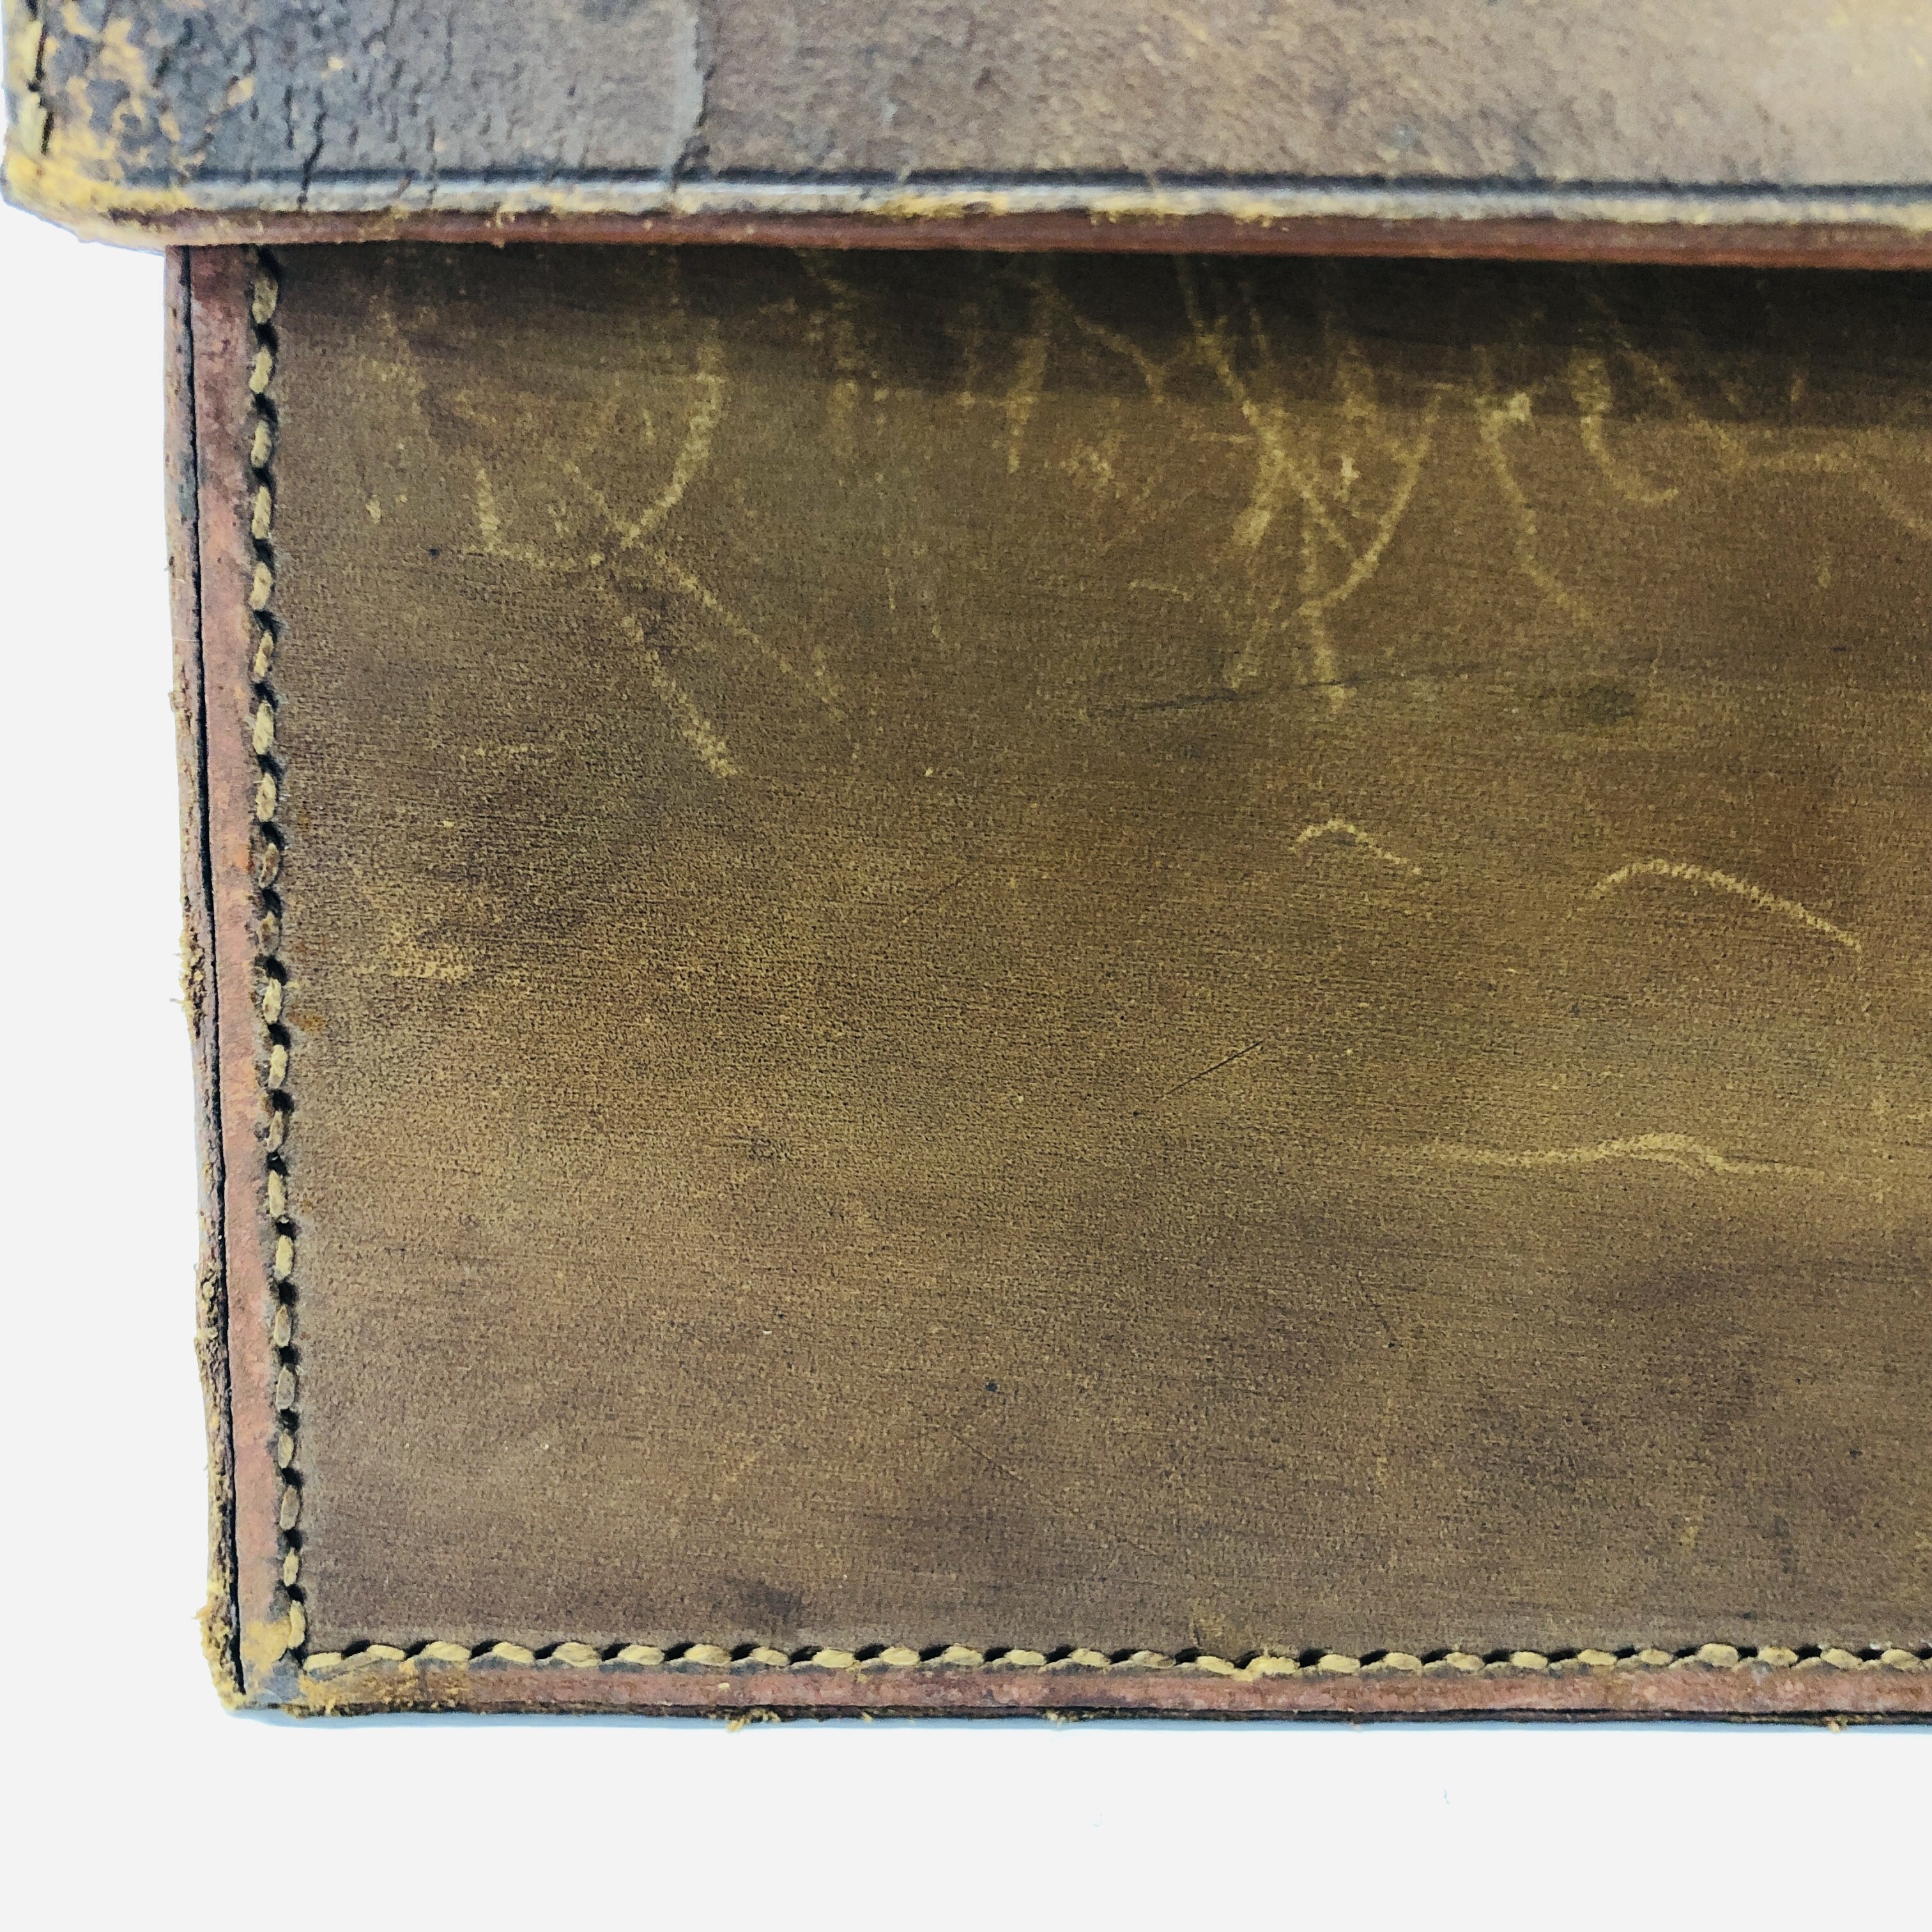 VINTAGE BROWN LEATHER TRAVEL CASE "THE BAG STORES" TRUNK MAKERS WITH FITTED INTERIOR AND ORIGINAL - Image 10 of 10